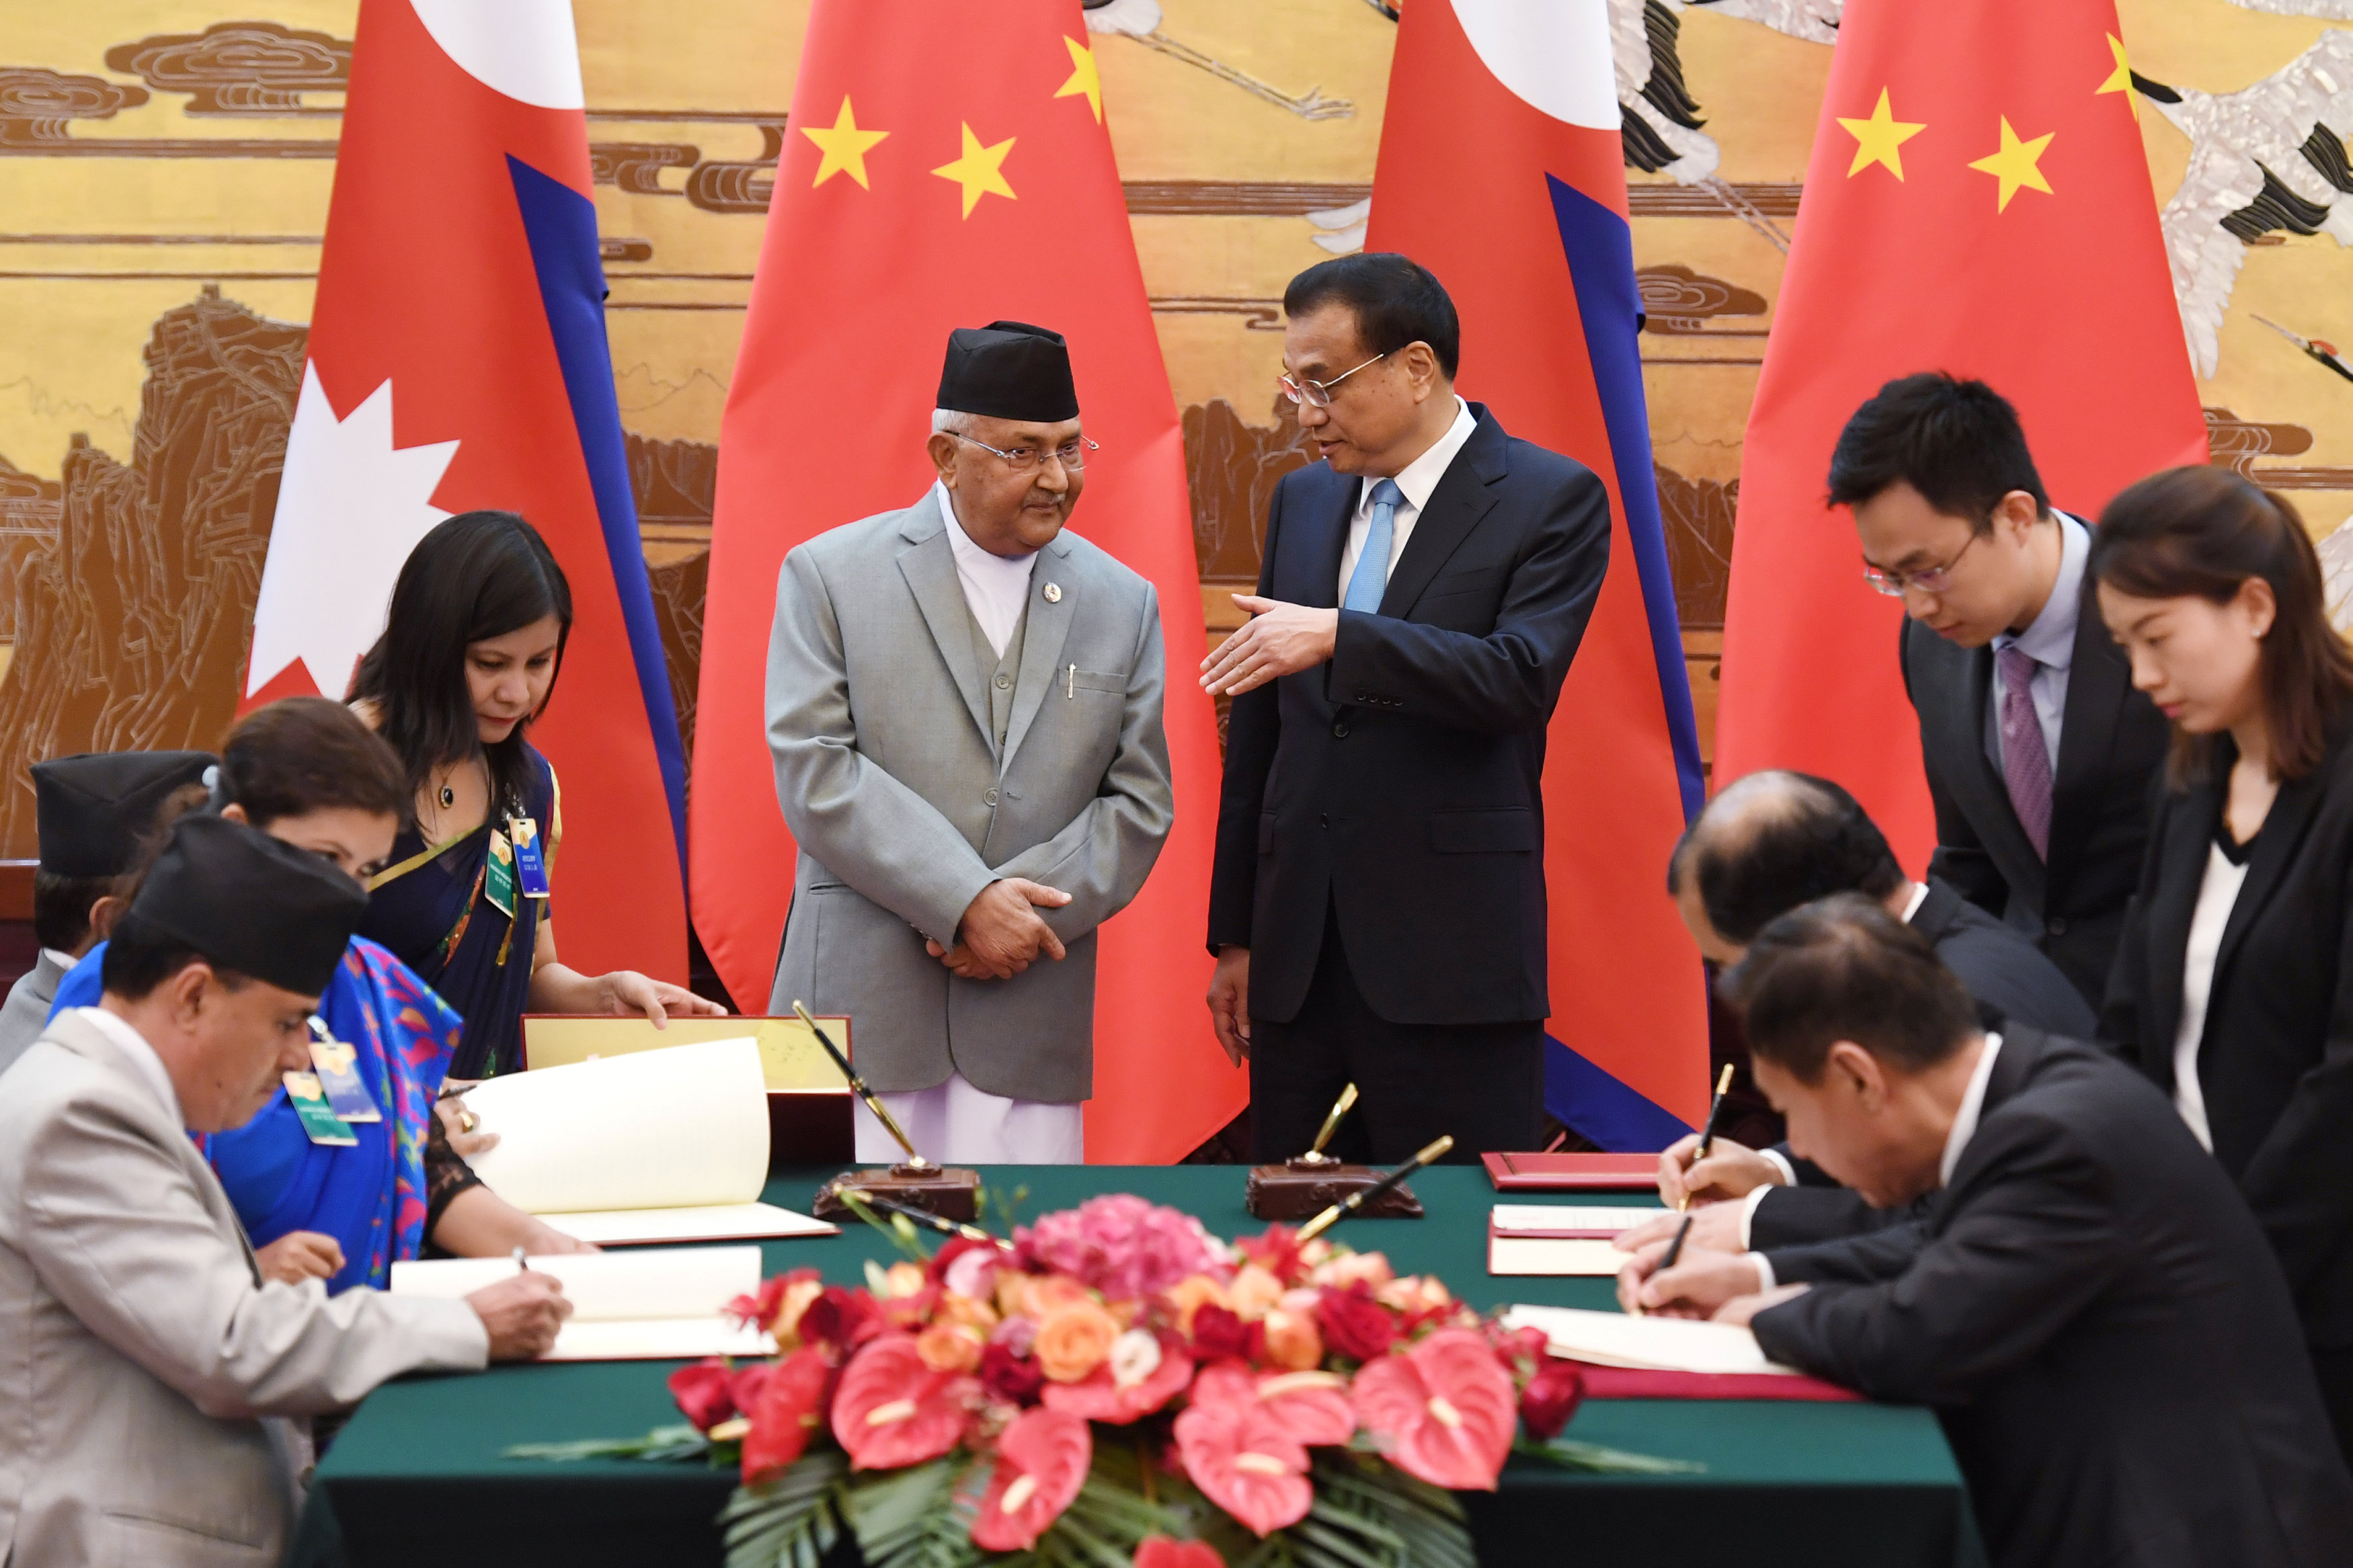 Nepal's Prime Minister KP Sharma Oli and Chinese Premier Li Keqiang speak during a signing ceremony at the Great Hall of the People in Beijing, China, on June 21, 2018. Photo: REUTERS